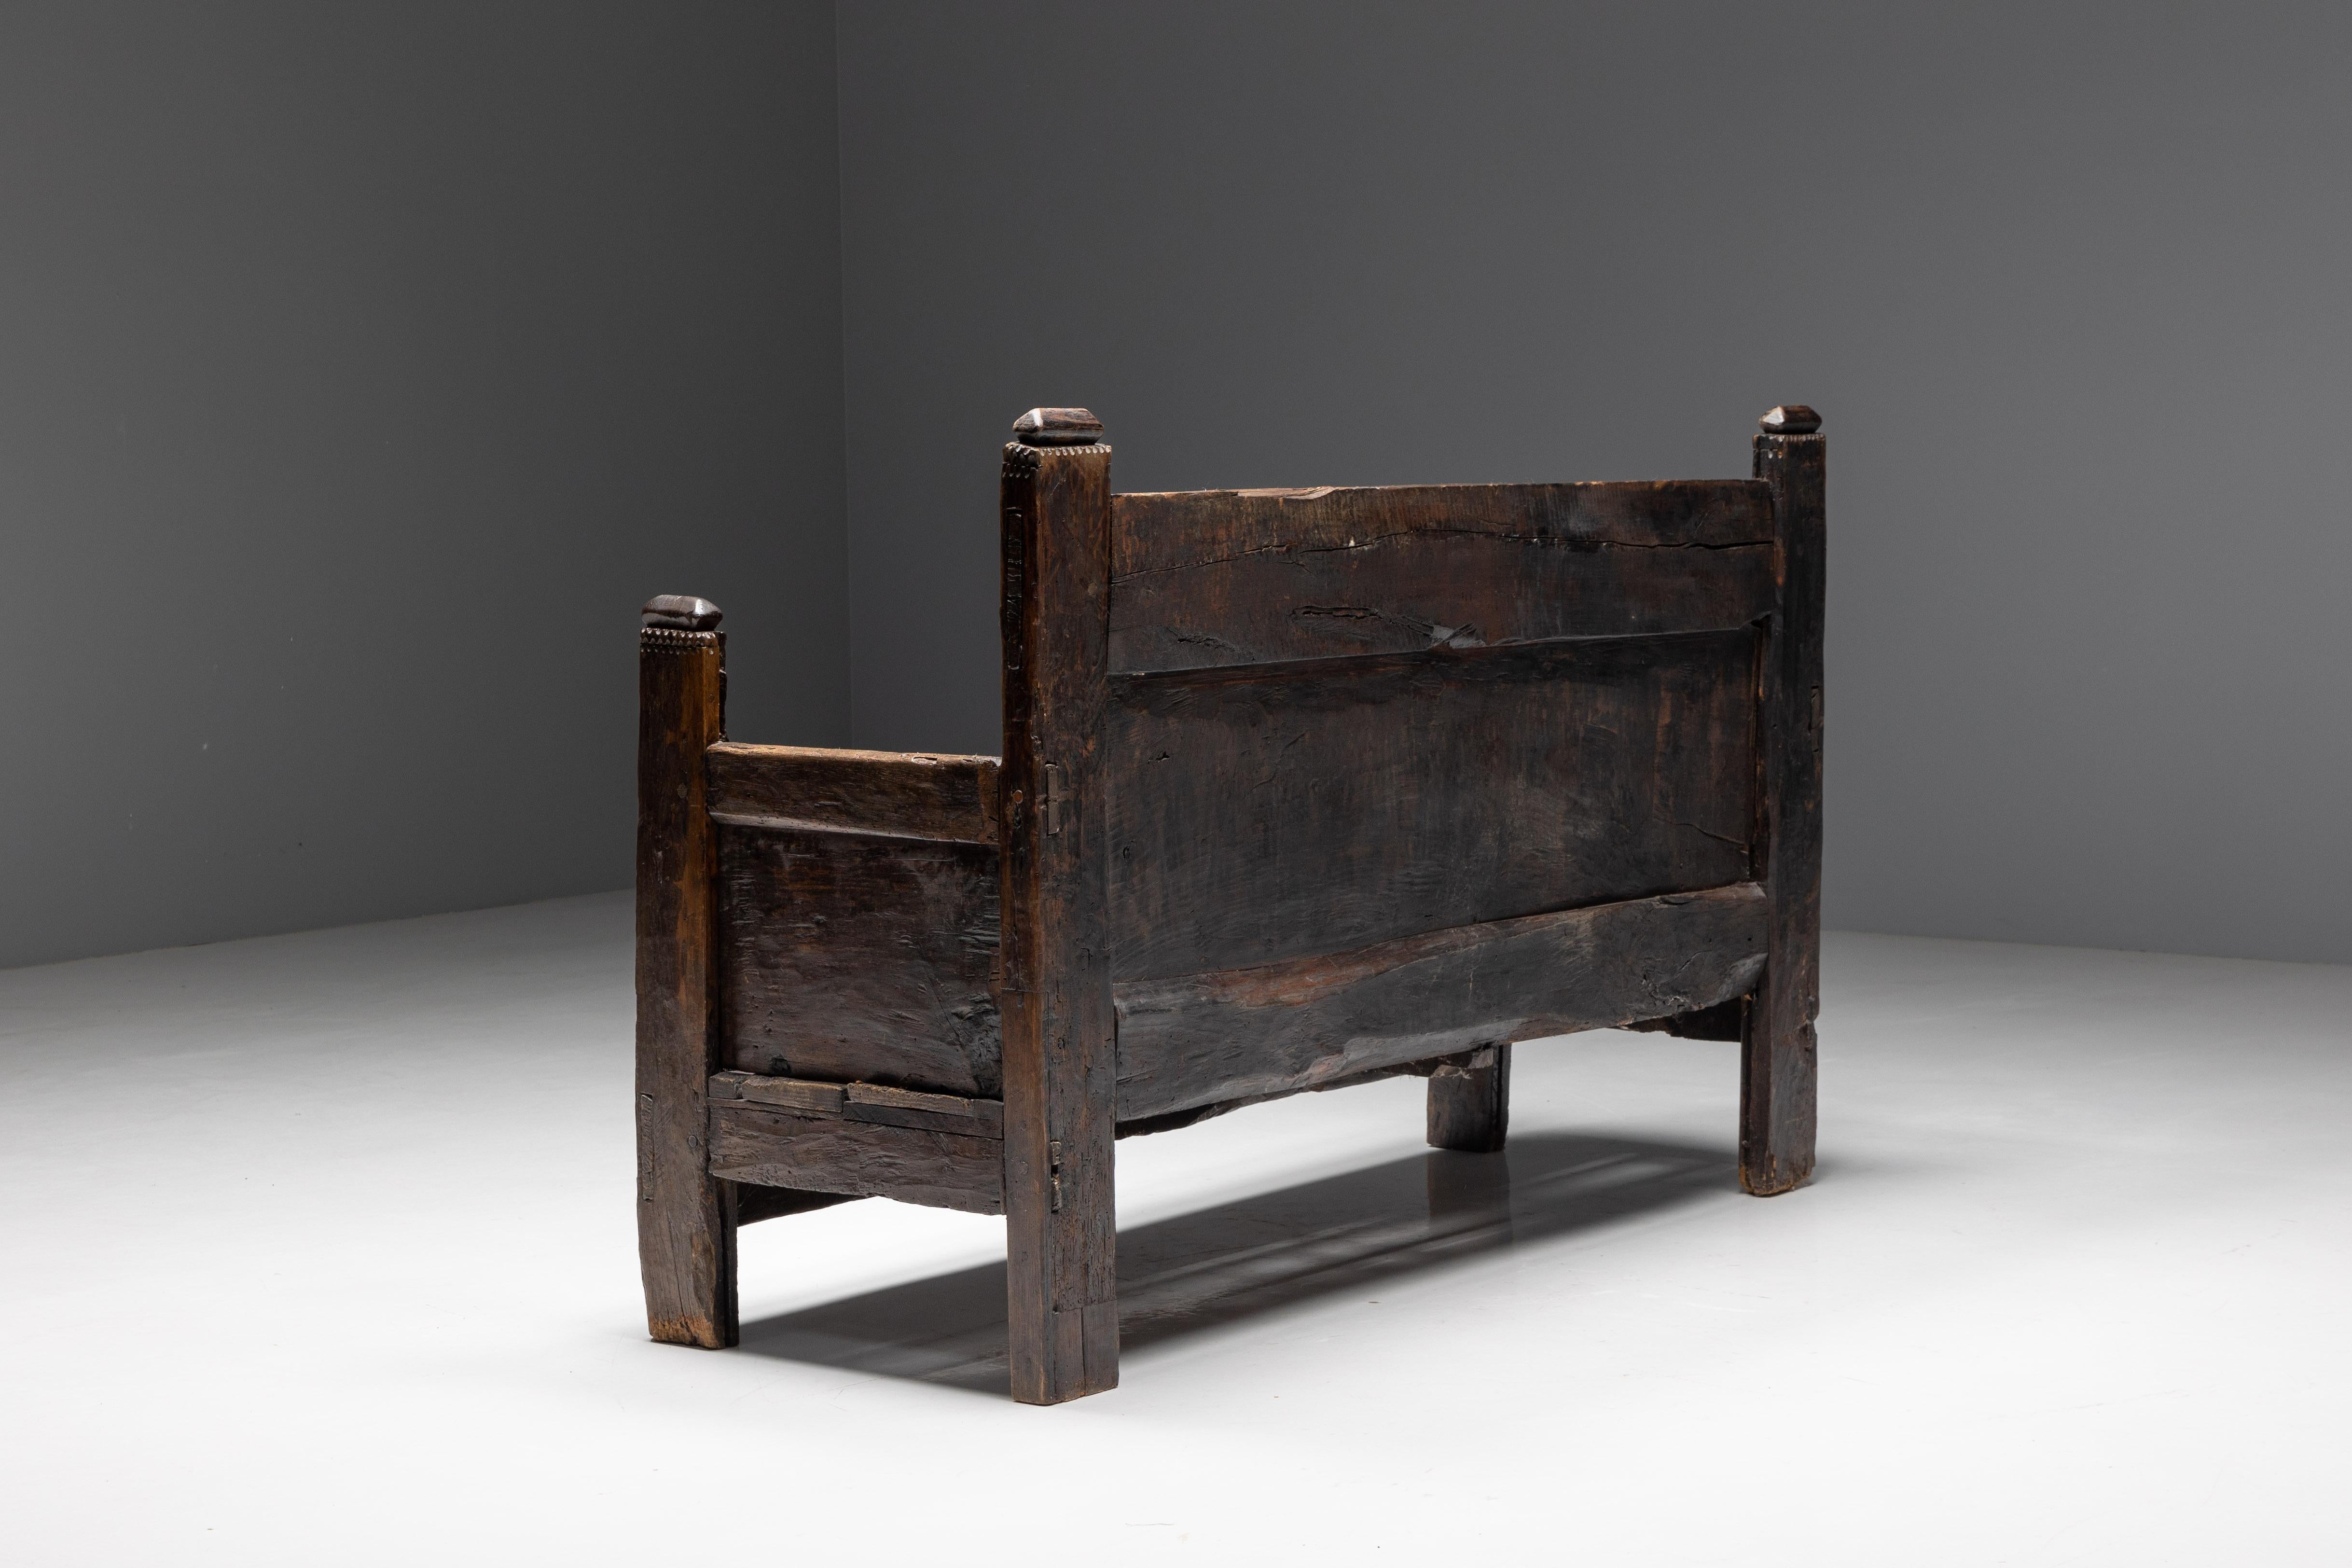 Rustic Art Populaire Bench, France, 19th Century For Sale 4